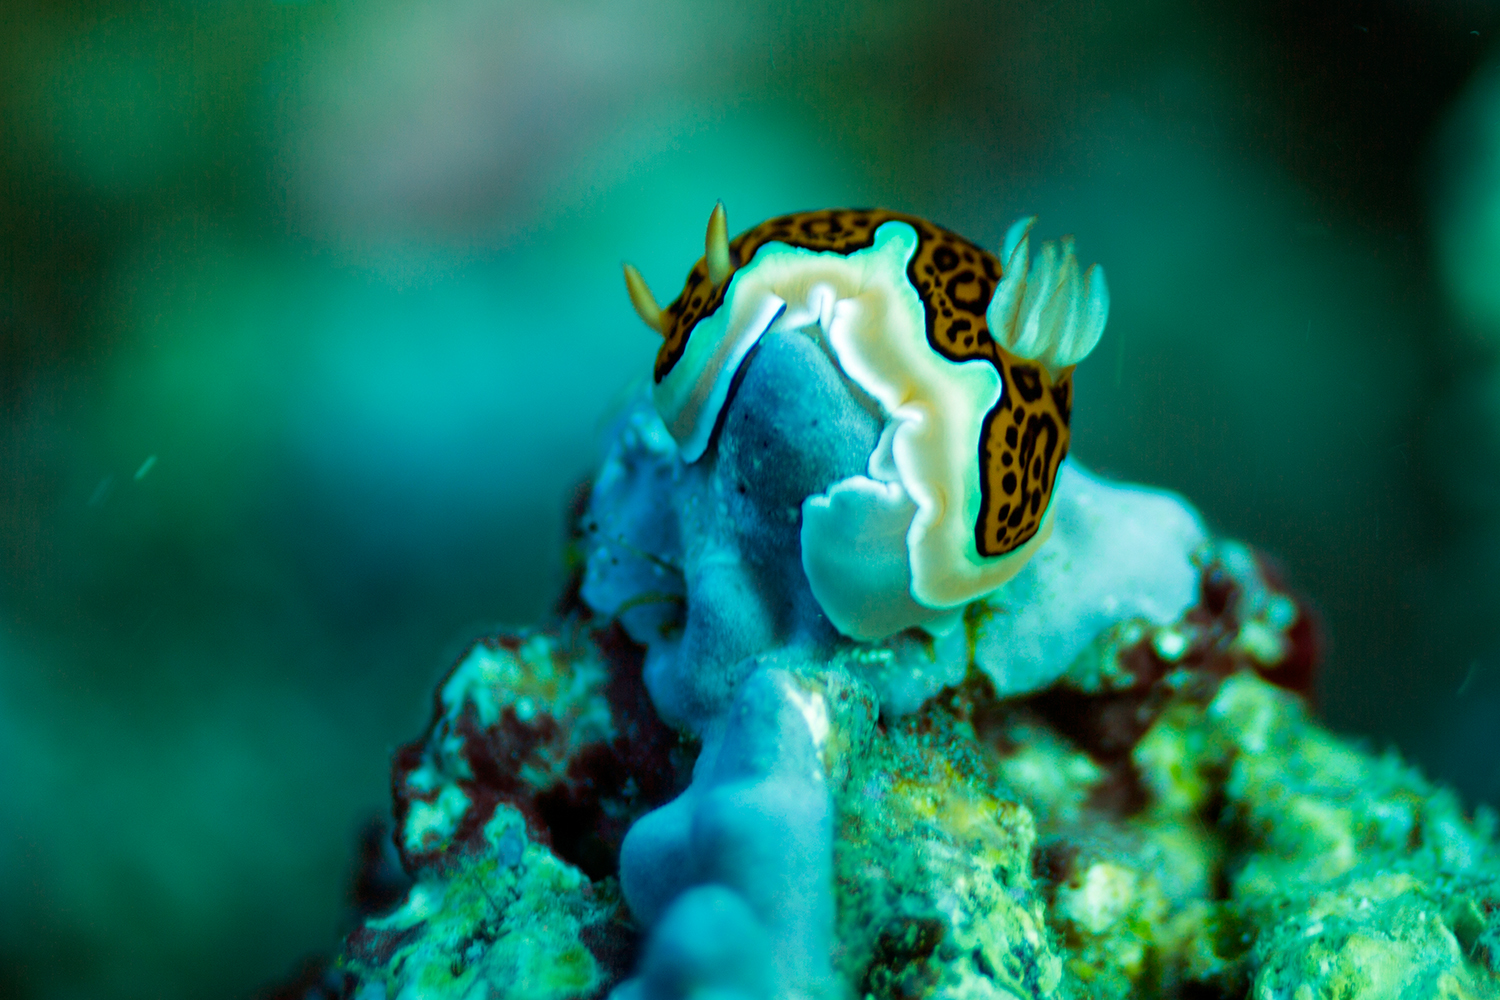 A little nudi clinging for its life in the strong Maldivian currents.